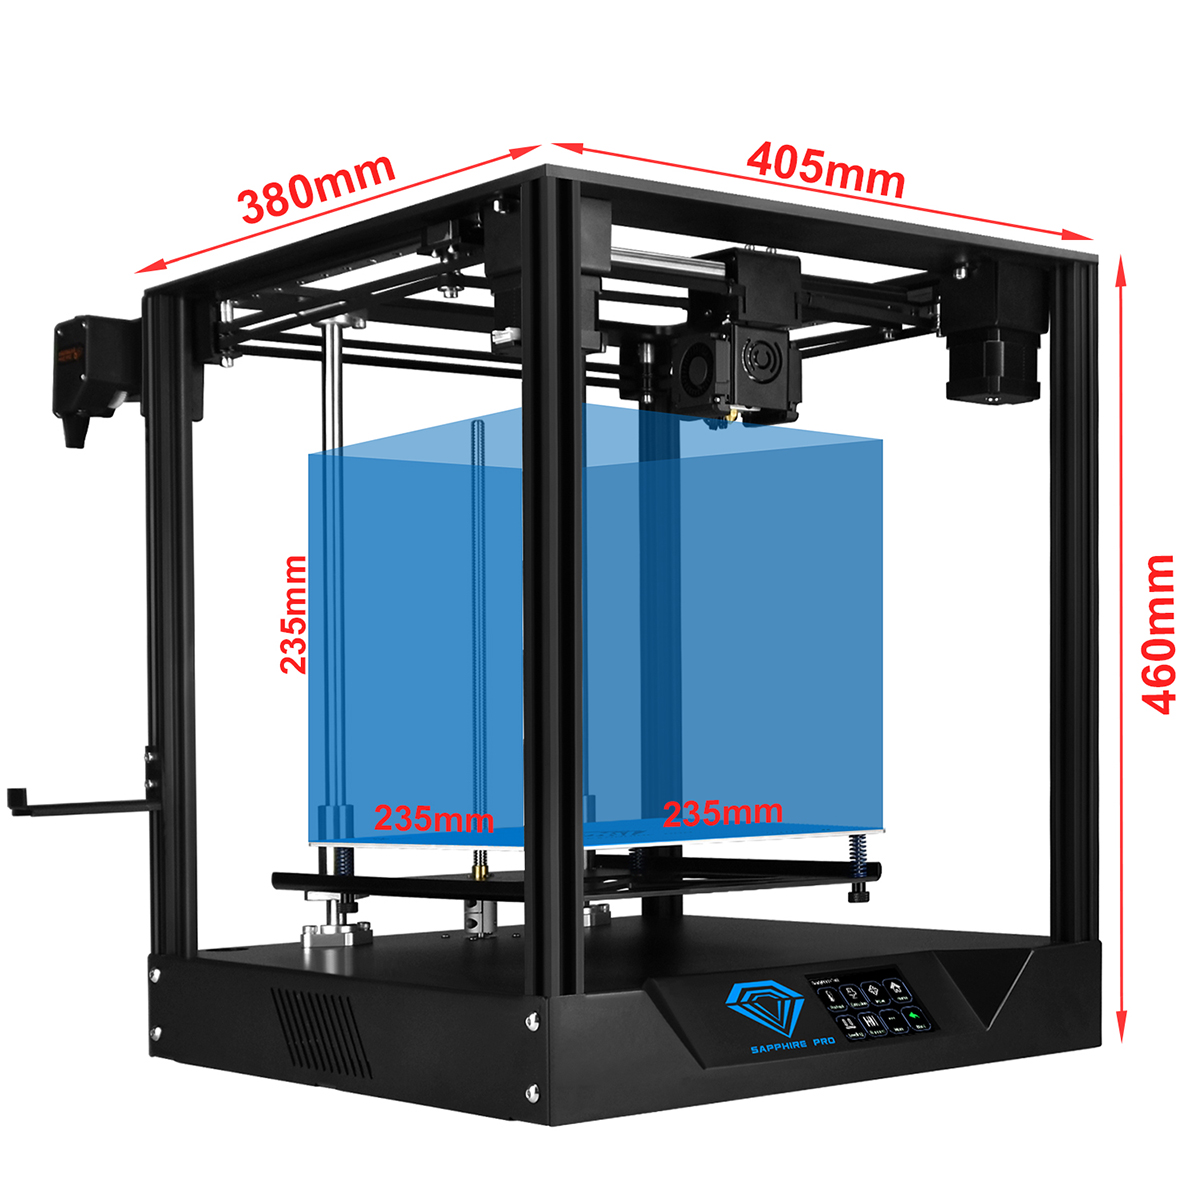 TWO TREES® Sapphire Pro CoreXY DIY 3D Printer Kit 235*235*235mm Printing Size With Dual Drive BMG Extruder / X-axis&Y-axis Linear Guide / Power Re 9